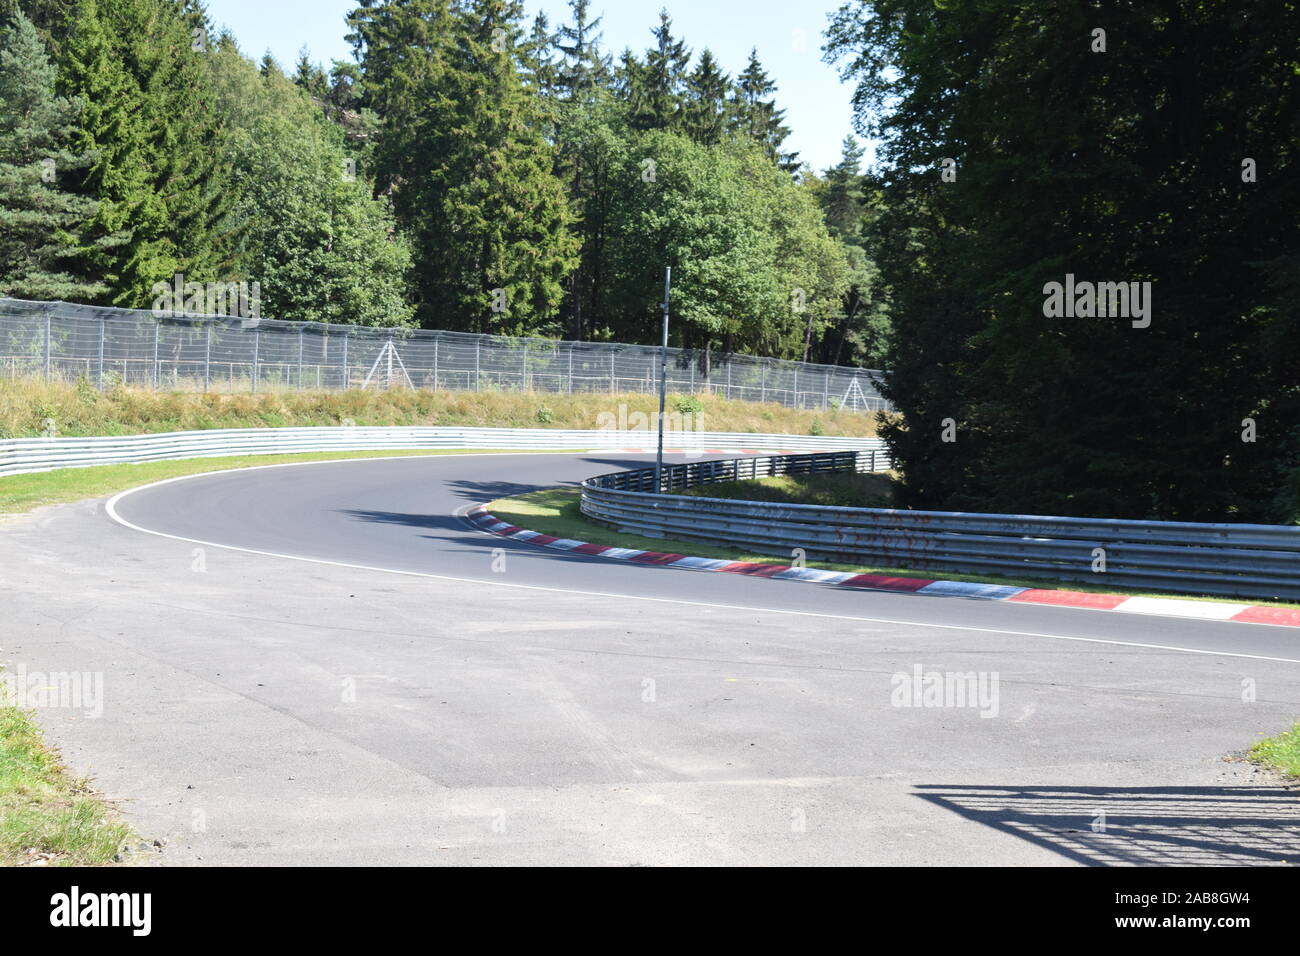 Hohe Acht curve of Nordschleife Nürburgring Stock Photo